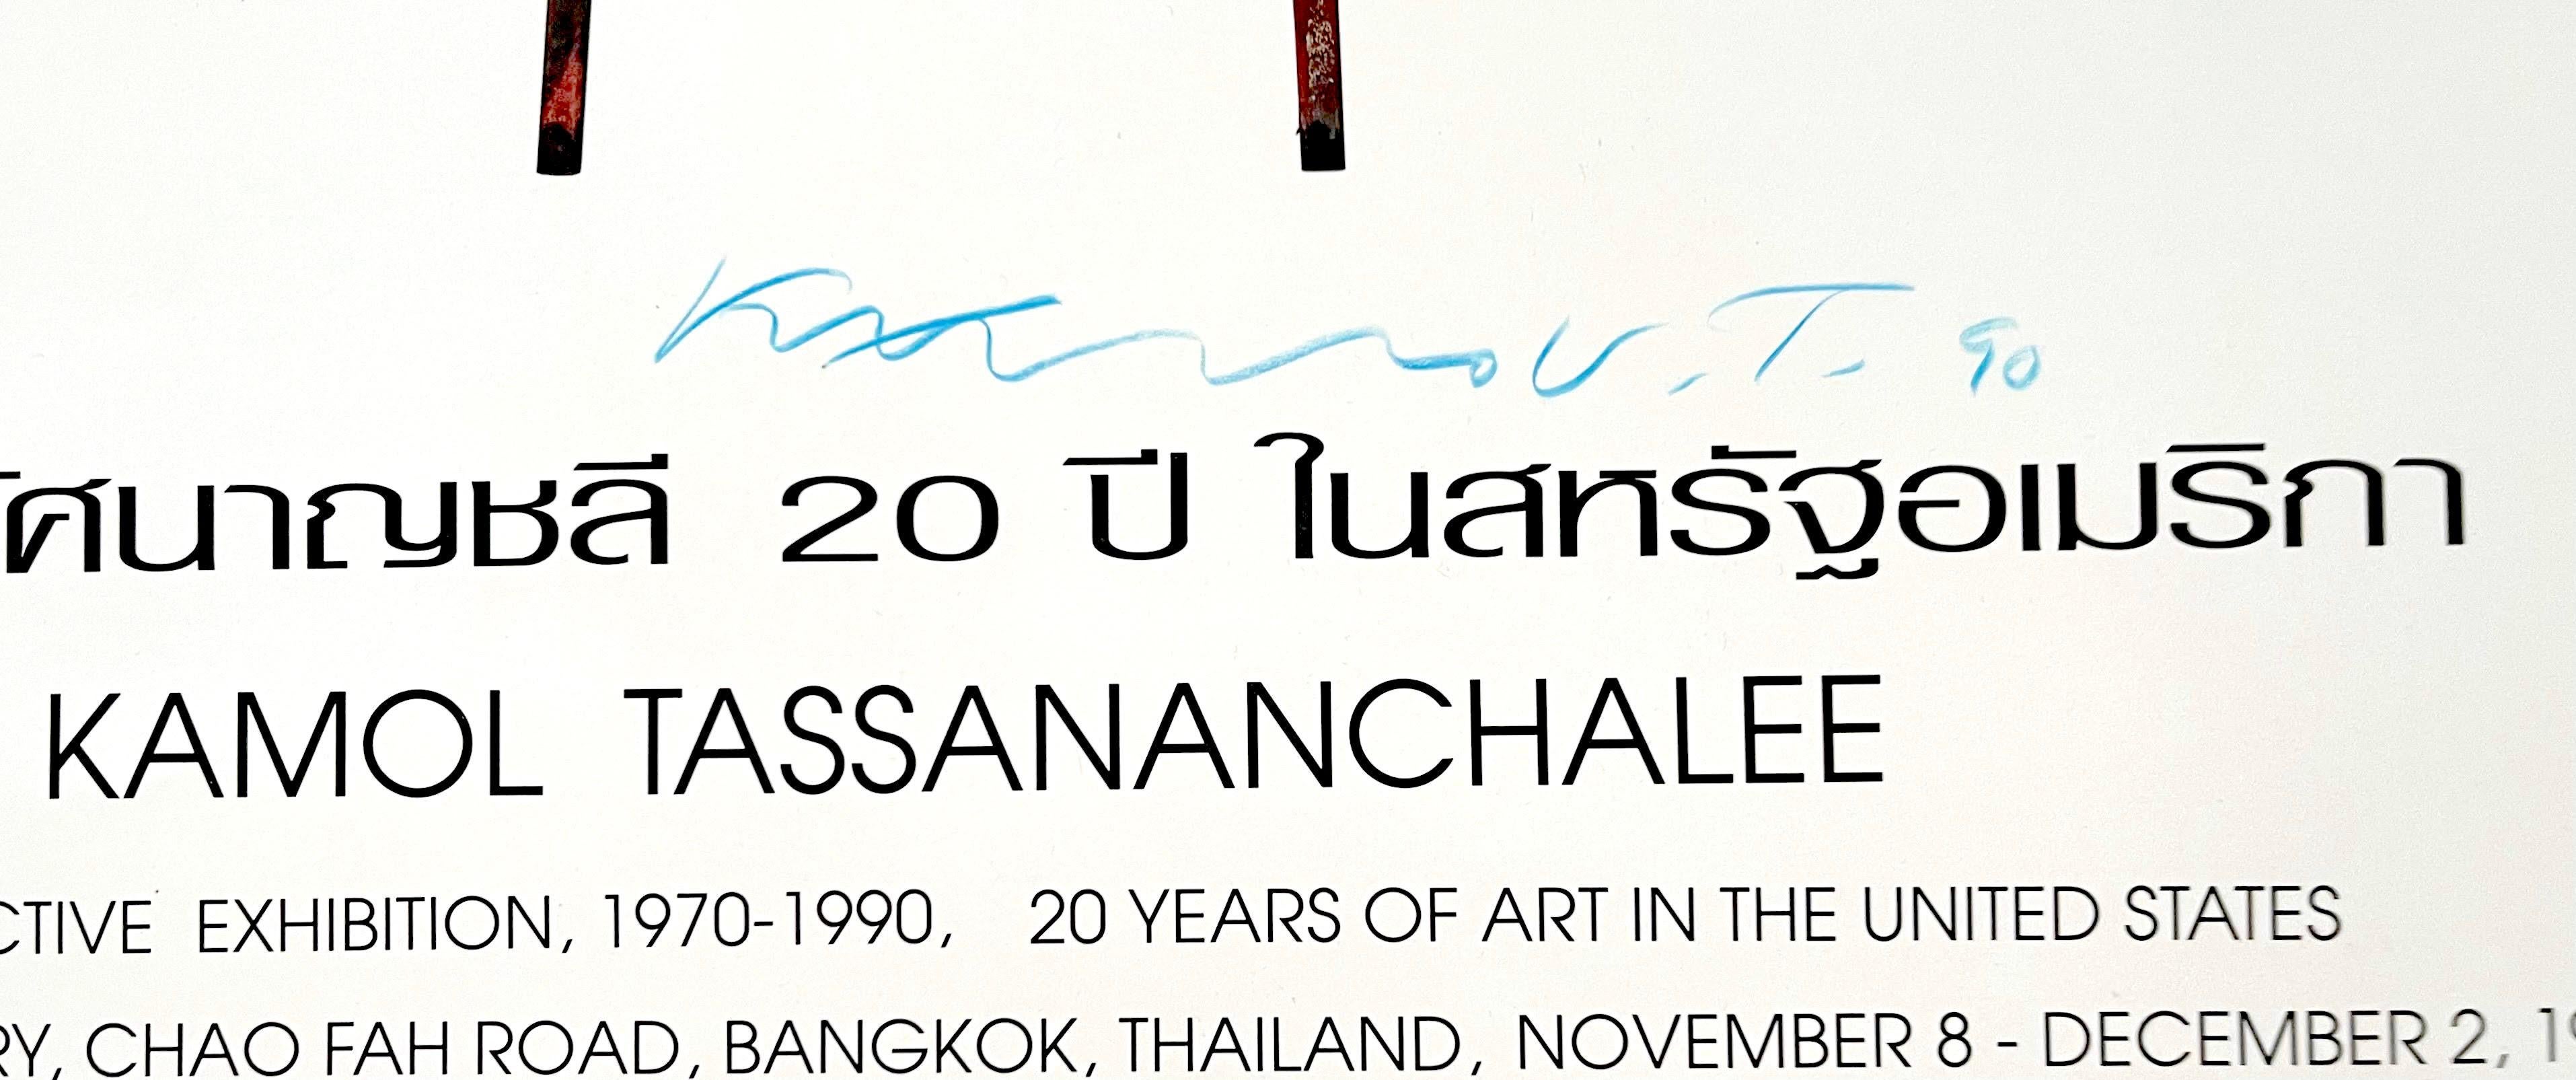 Retrospective exhibition poster, The National Gallery, Thailand (Hand signed) - Abstract Print by Kamol Tassananchalee